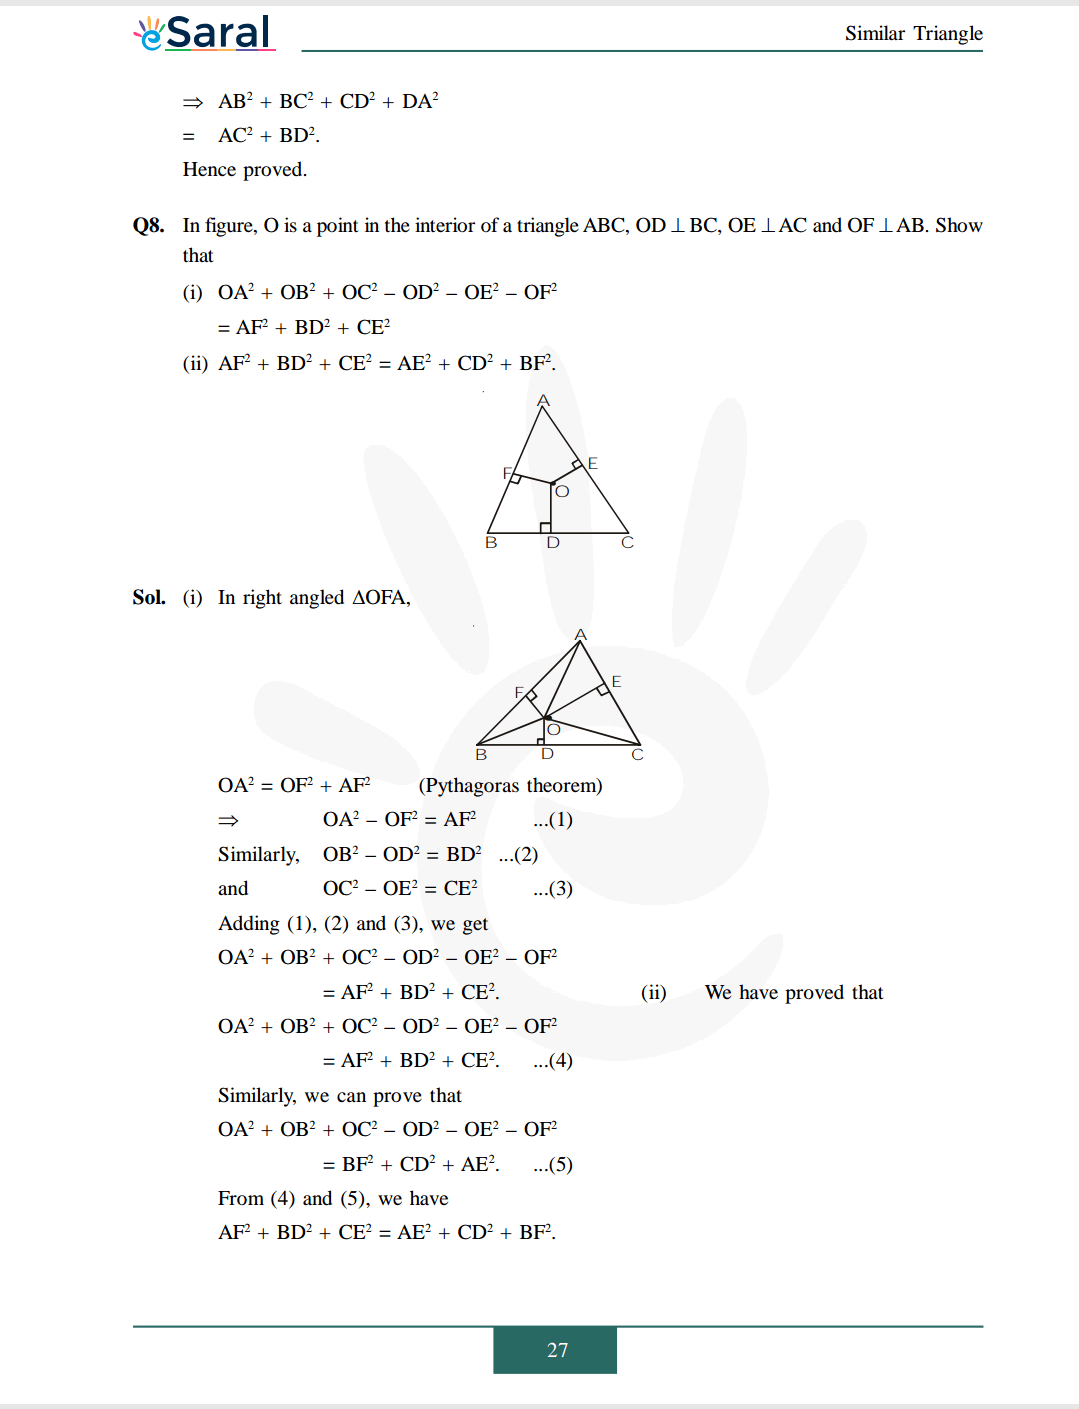 Class 10 Maths Chapter 6 exercise 6.5 solutions Image 4